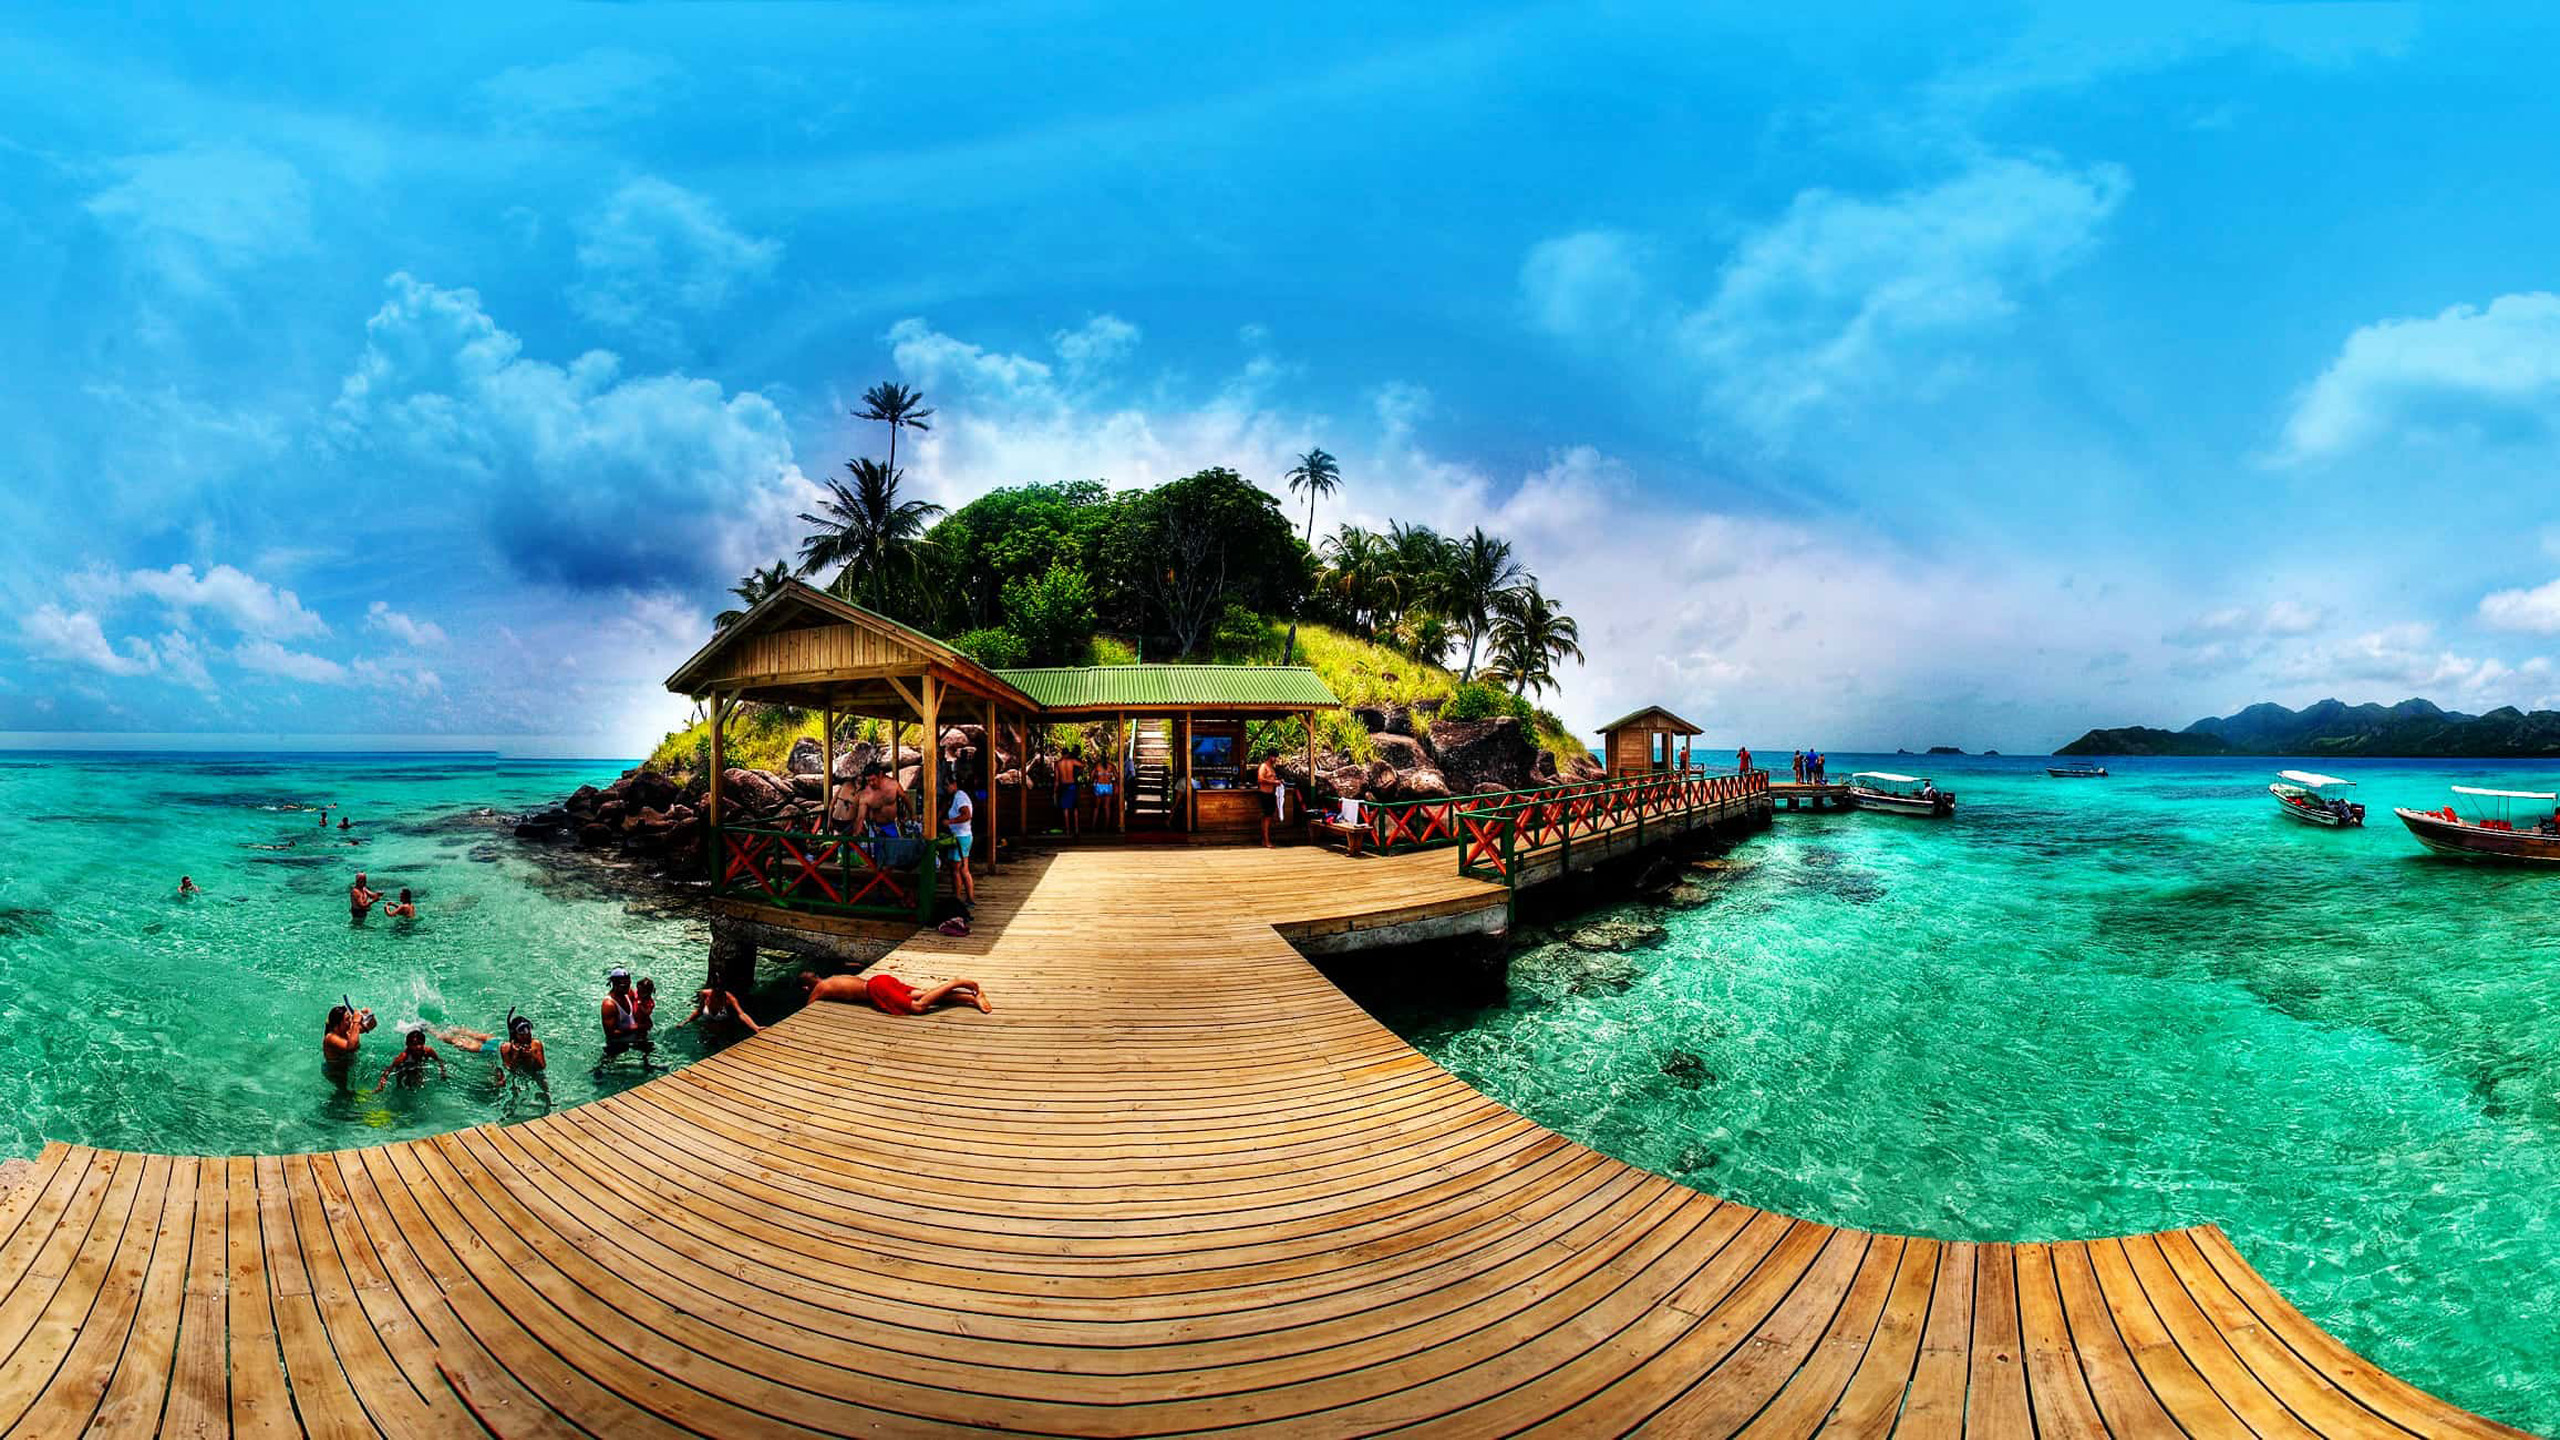 San Andres Colombia Hd - HD Wallpaper 